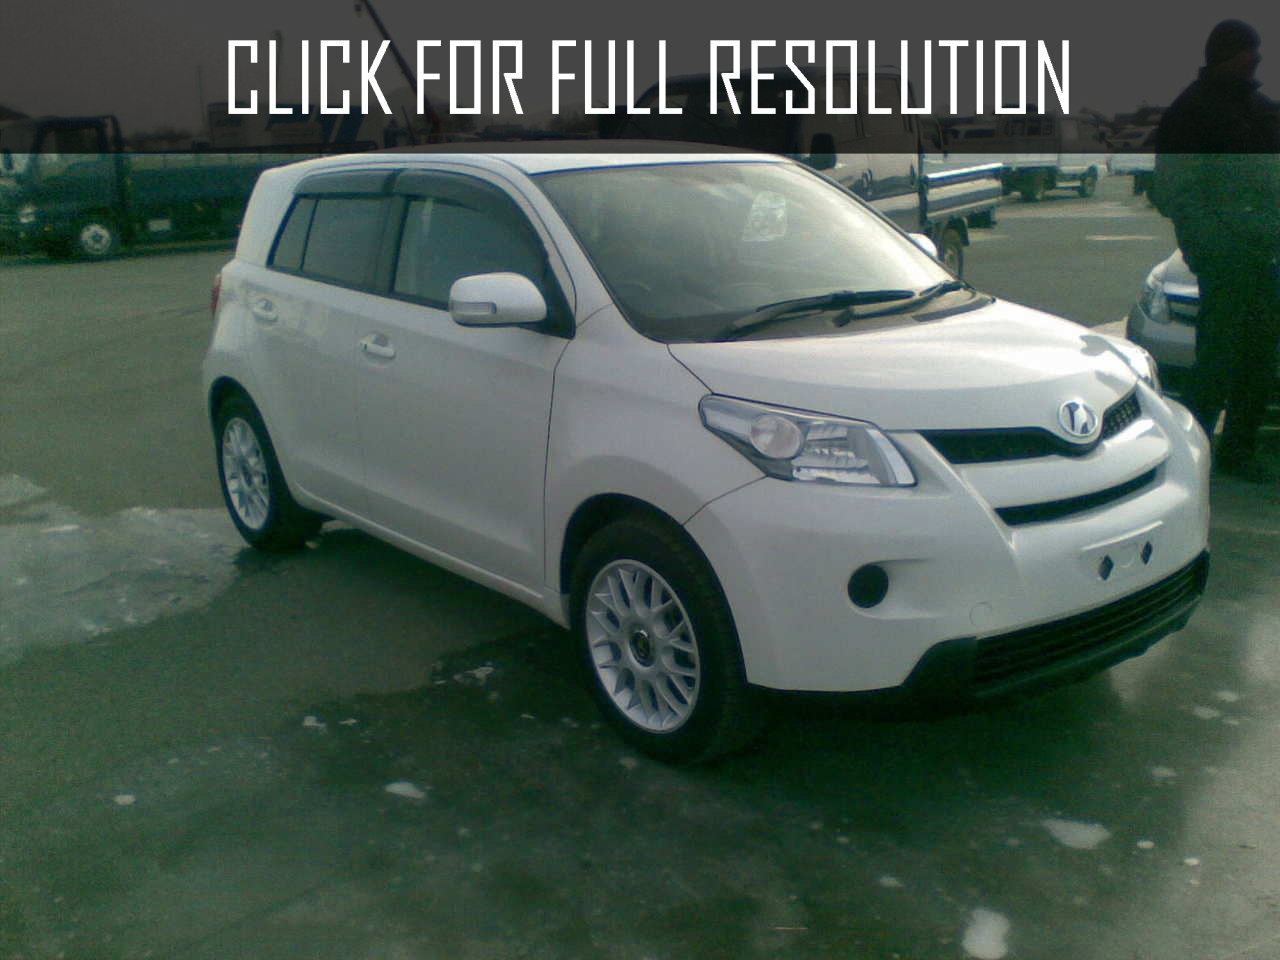 Toyota Ist The Latest News And Reviews With The Best Toyota Ist